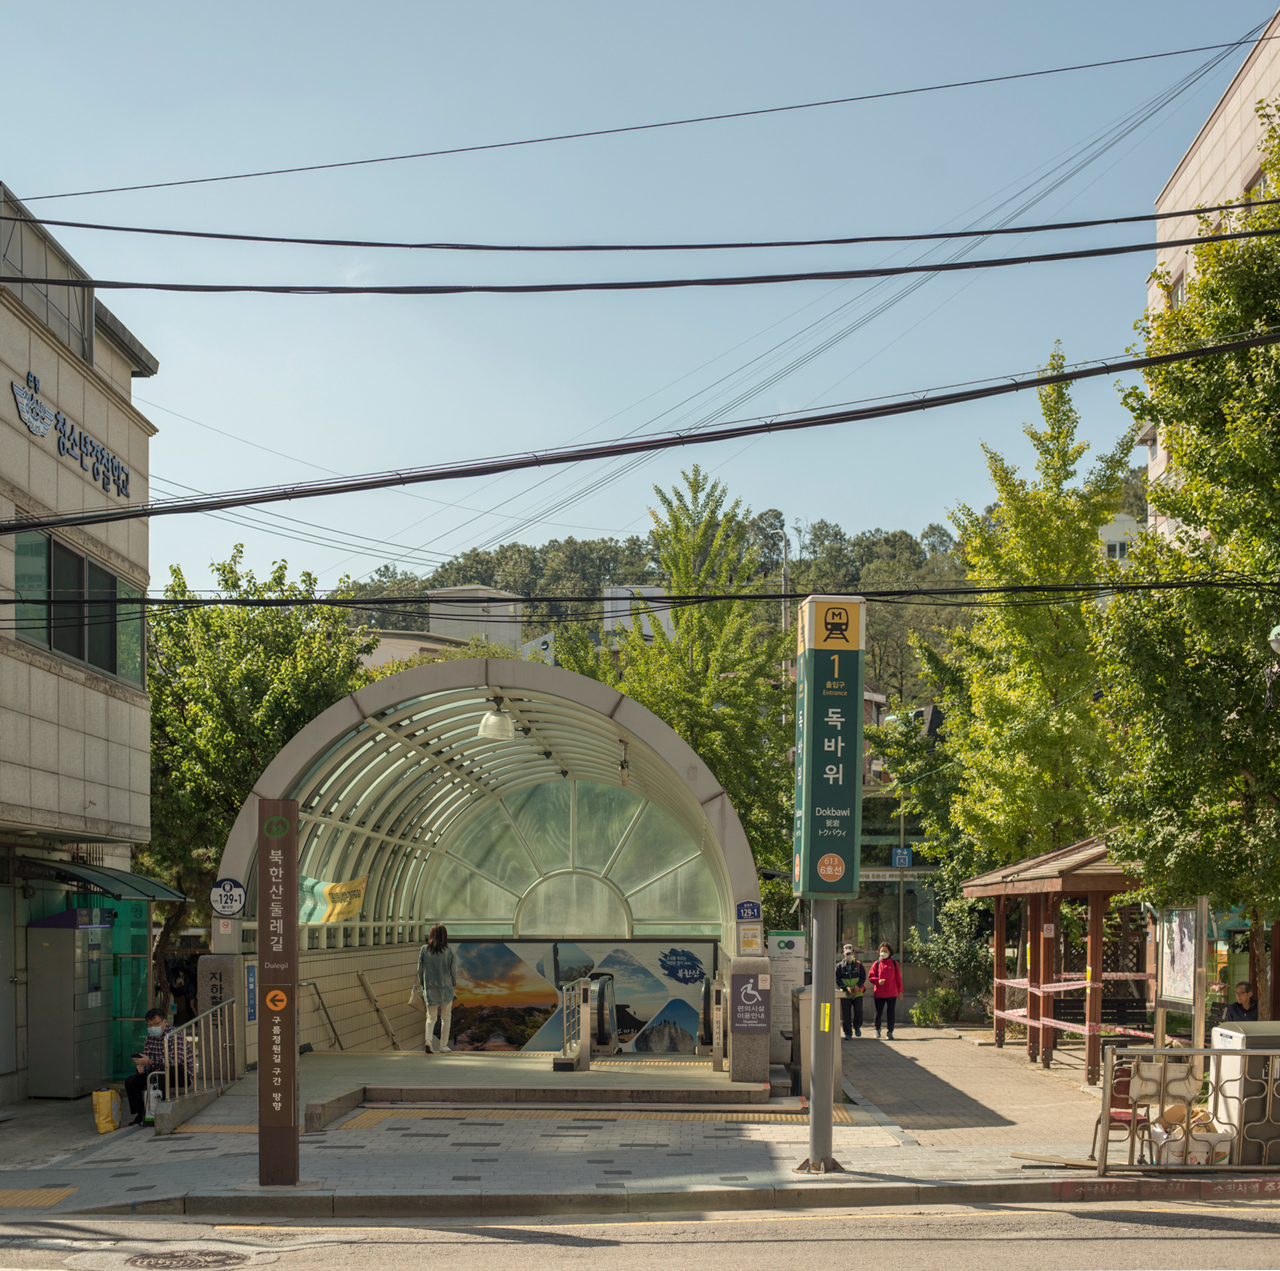 The entrance of a subway on the edge of a wooded area with buildings and sidewalks and powerlines